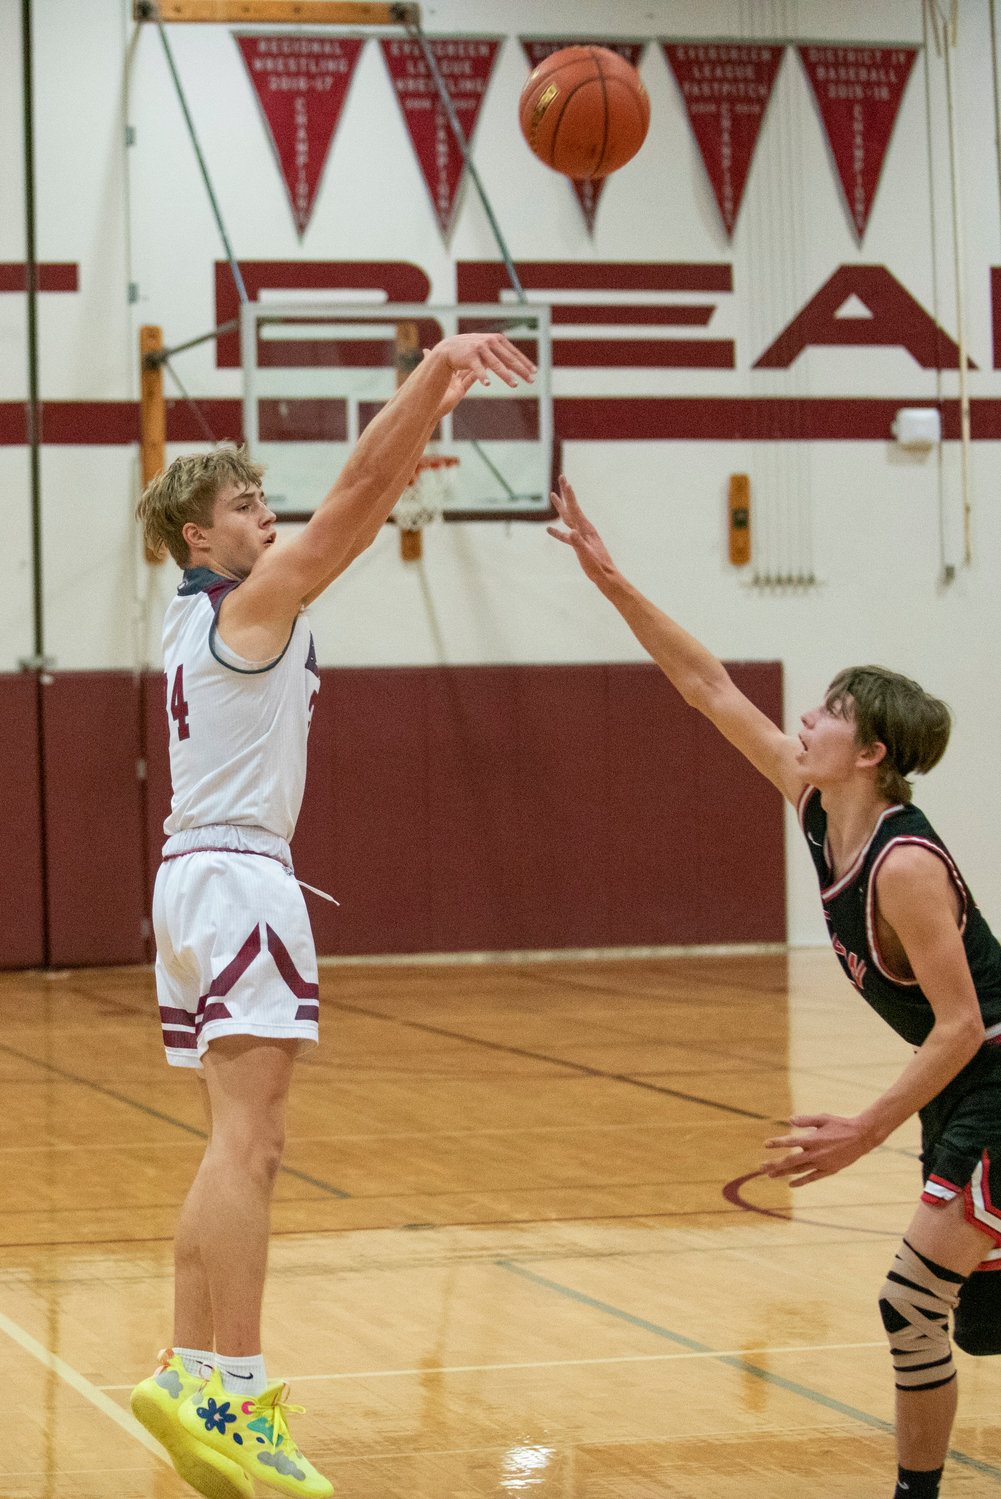 W.F. West freshman Gage Brumfield, left, pulls up on a Shelton player during a home game Dec. 8.